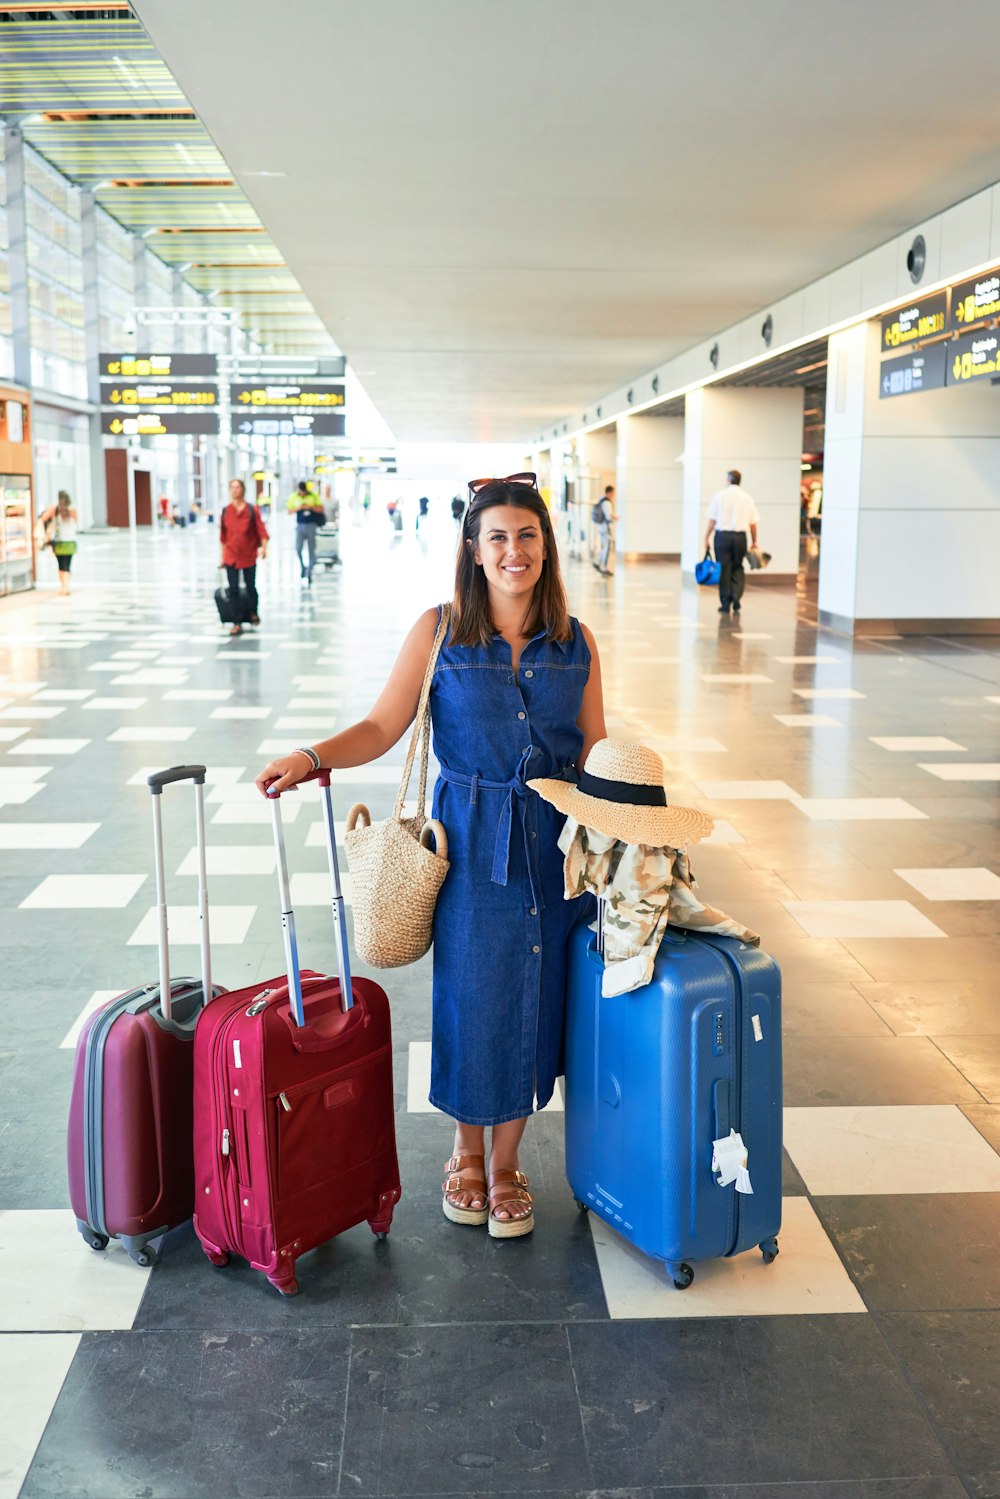 woman in blue denim jacket holding red luggage bag